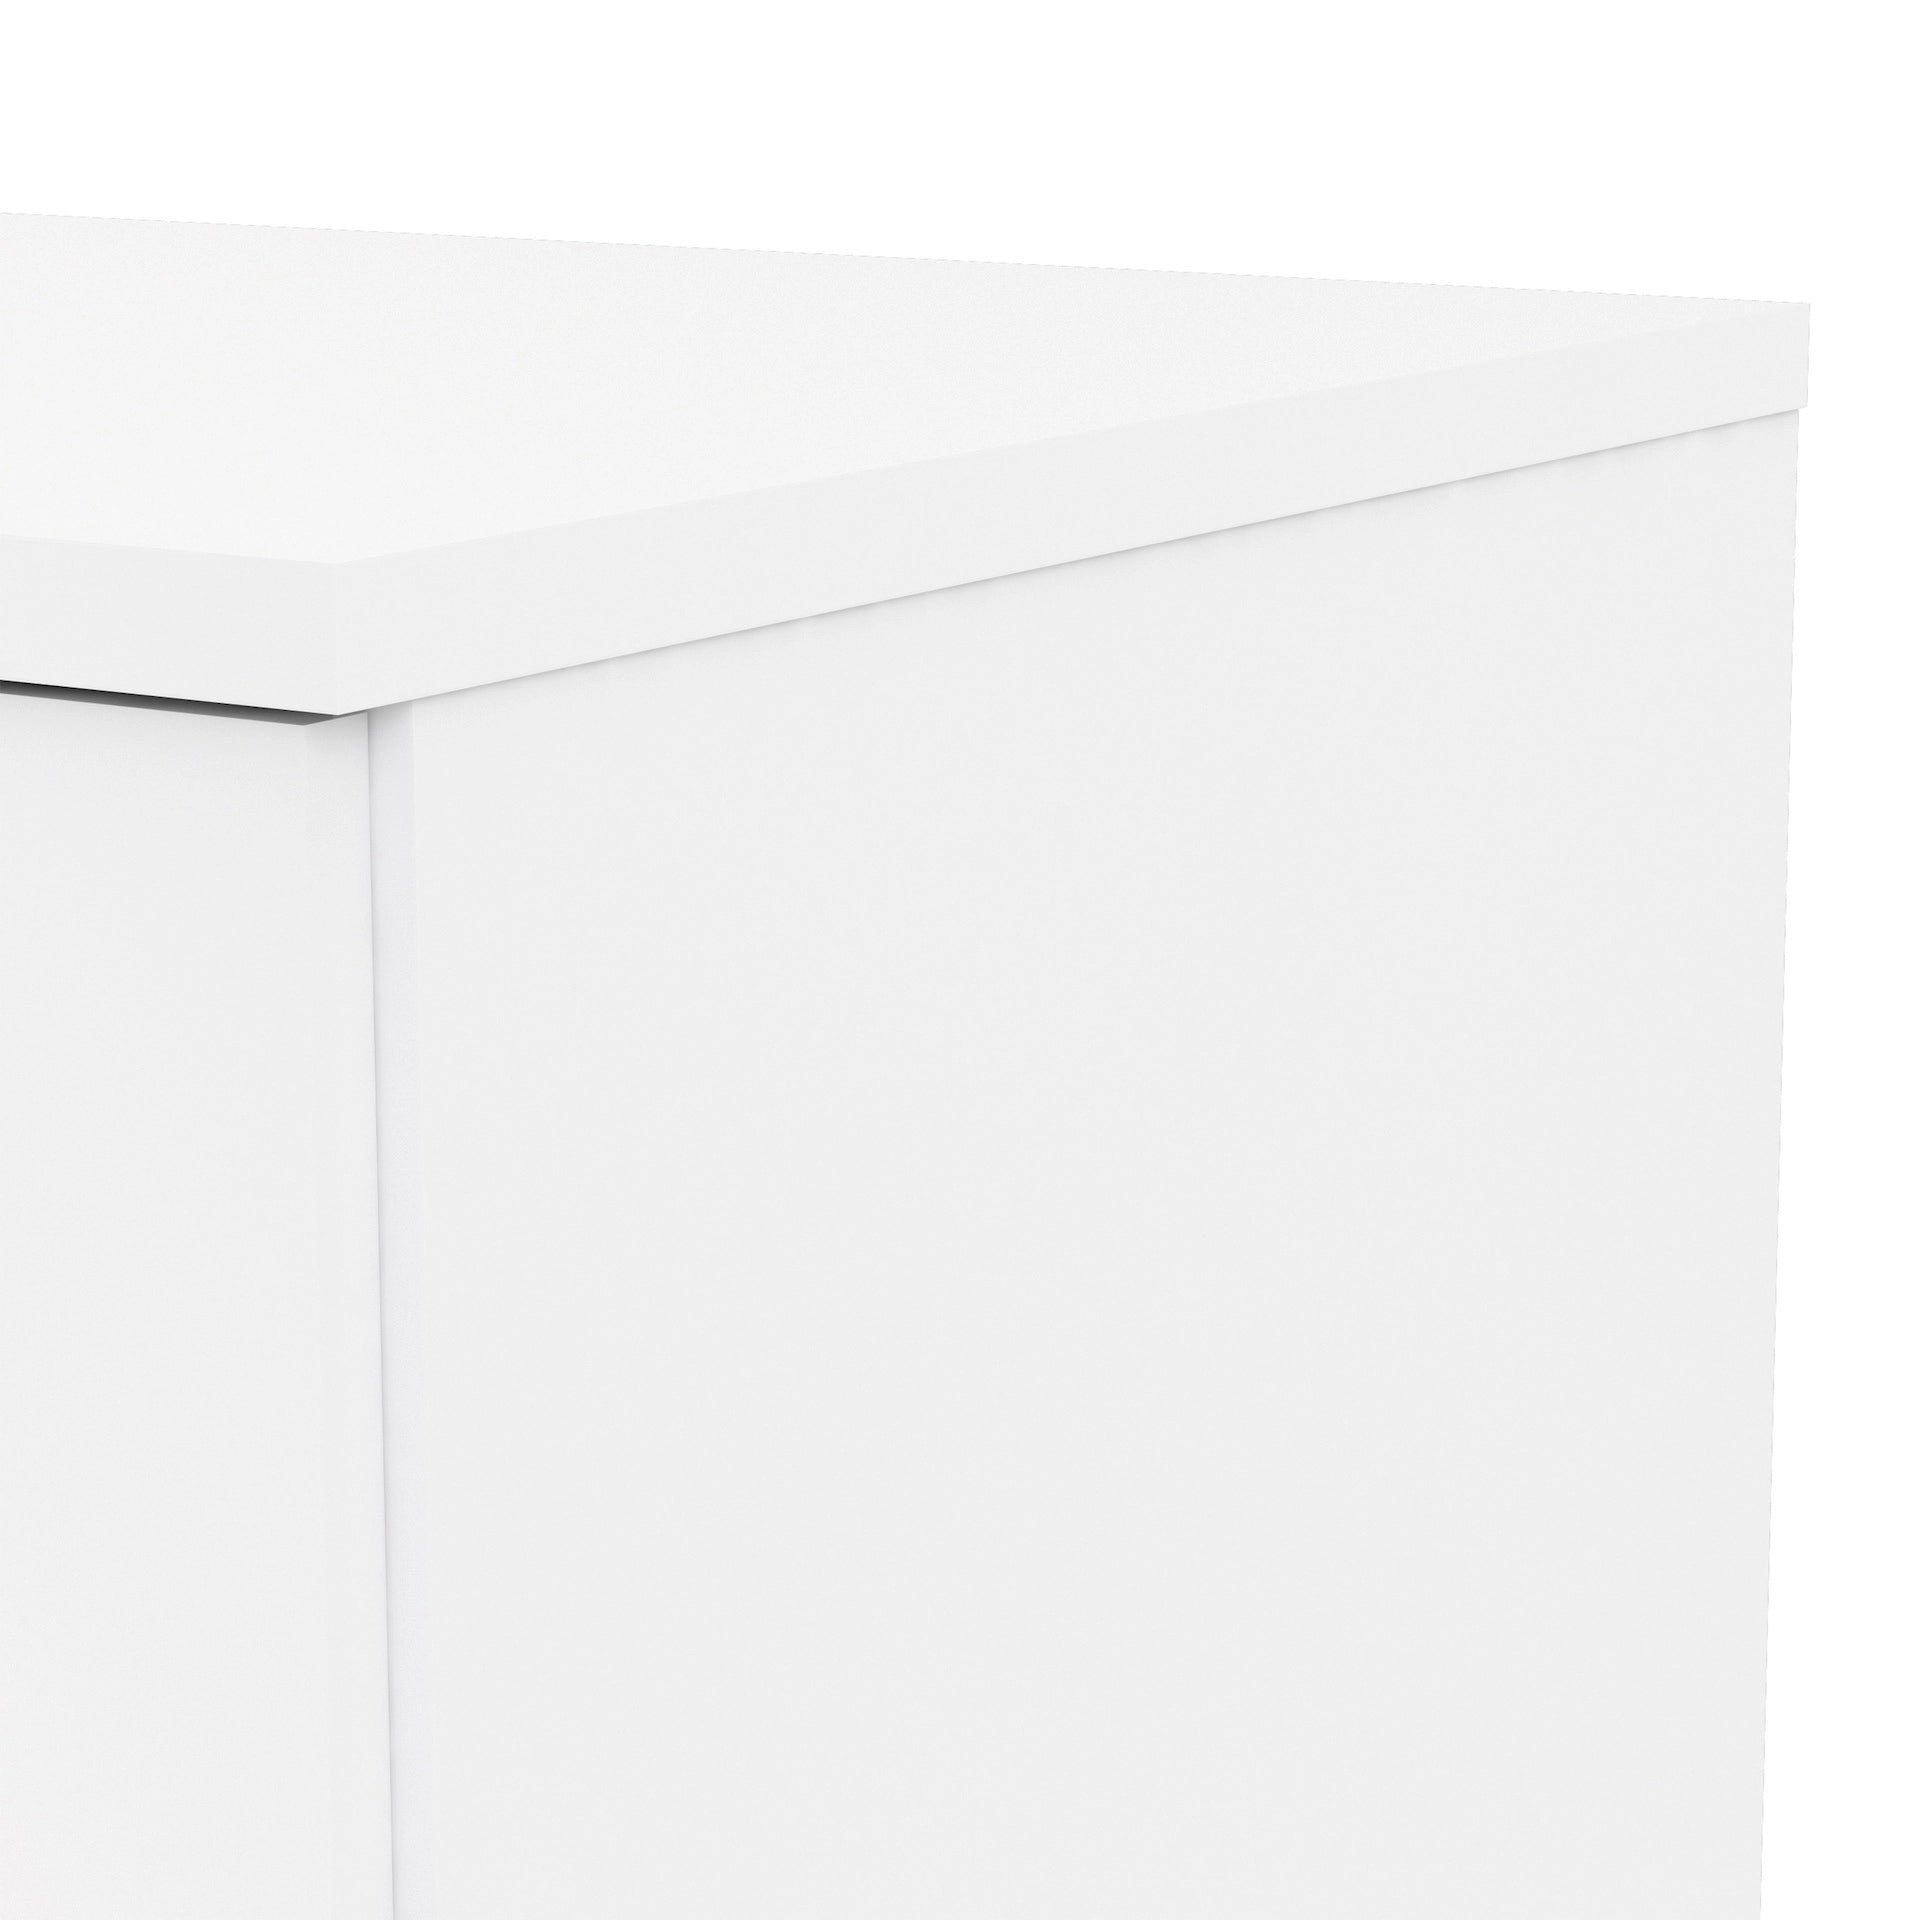 Furniture To Go Naia Wardrobe with 3 Doors + 2 Drawers in White High Gloss